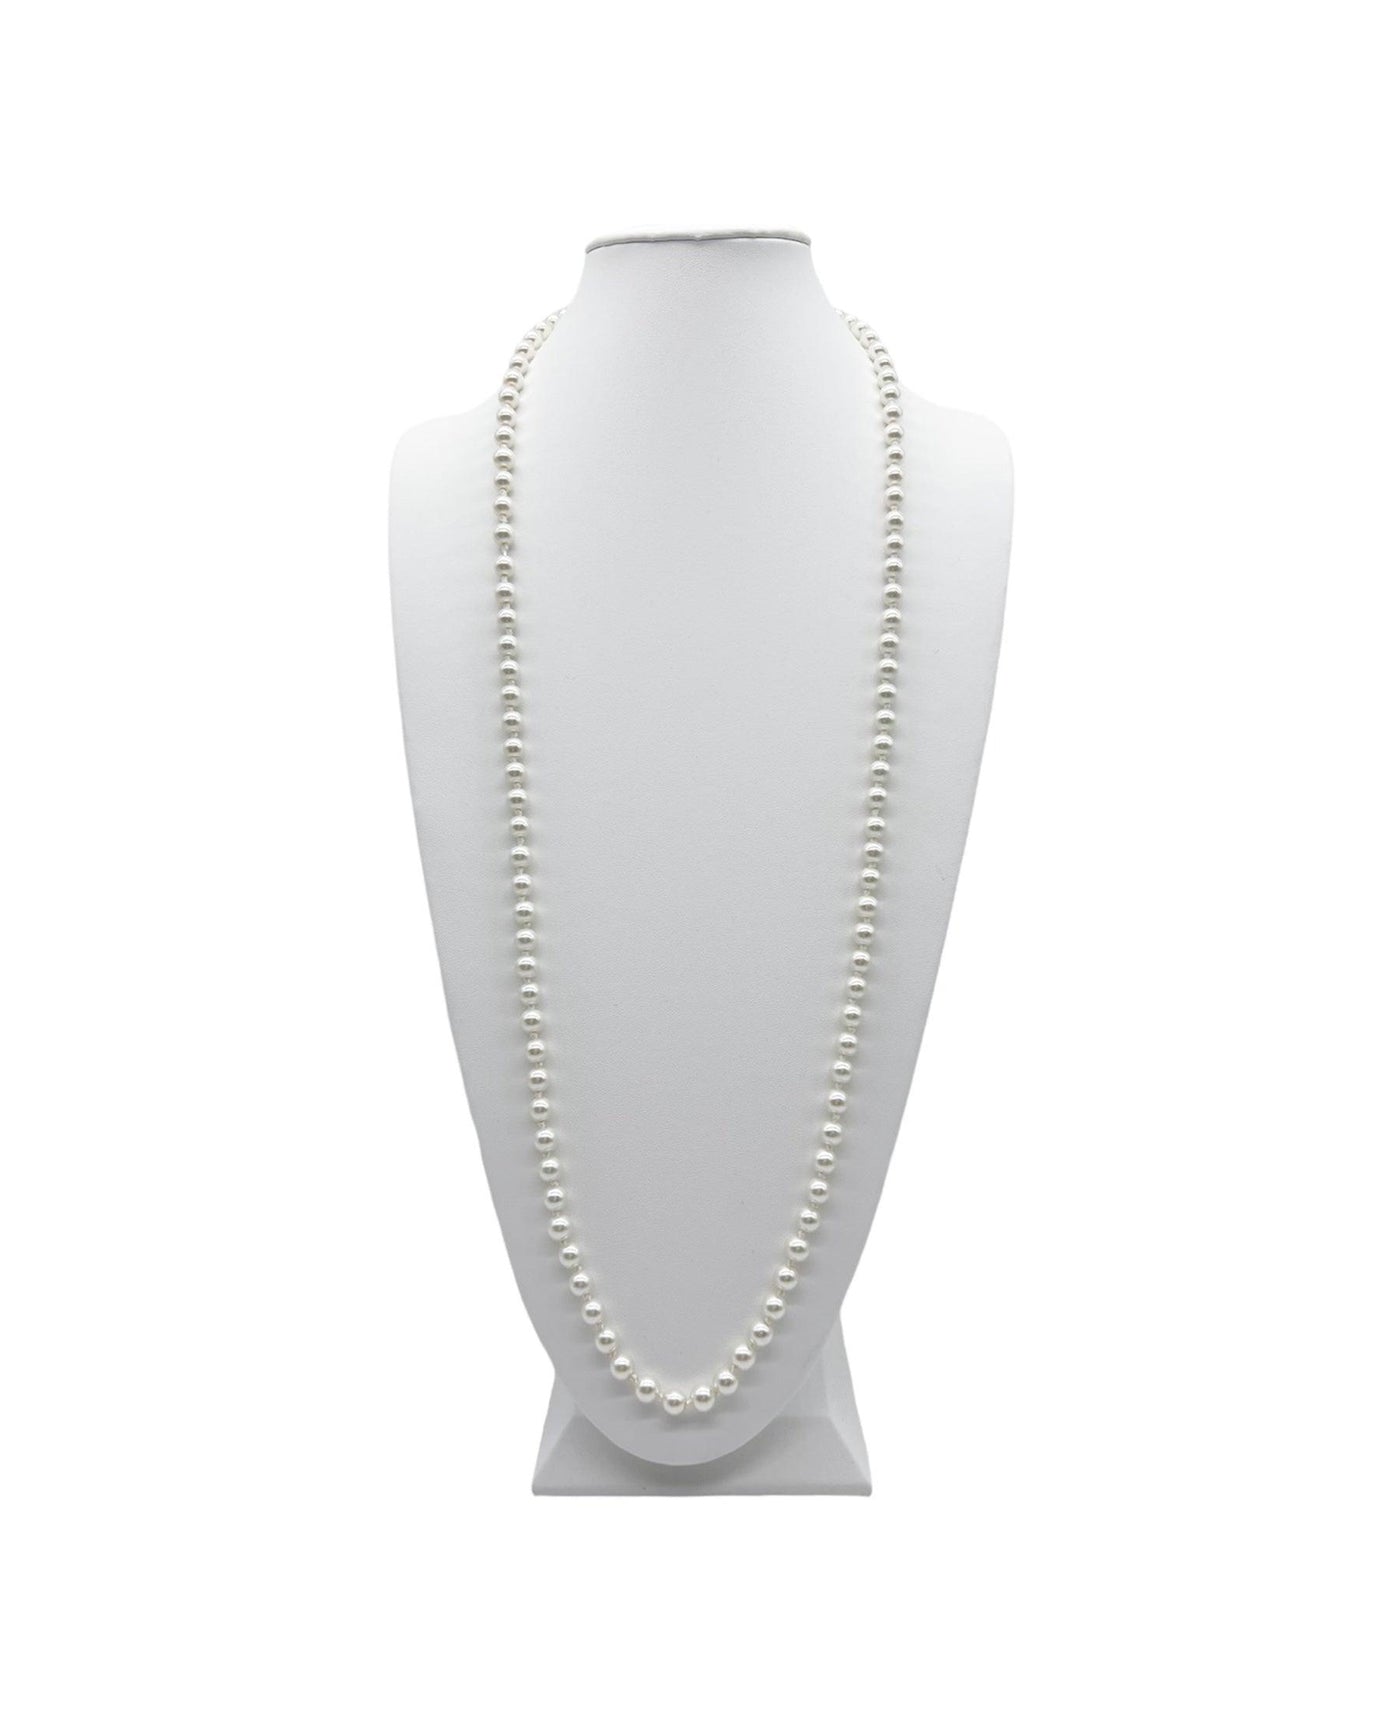 Long pearl necklace on a white neck display